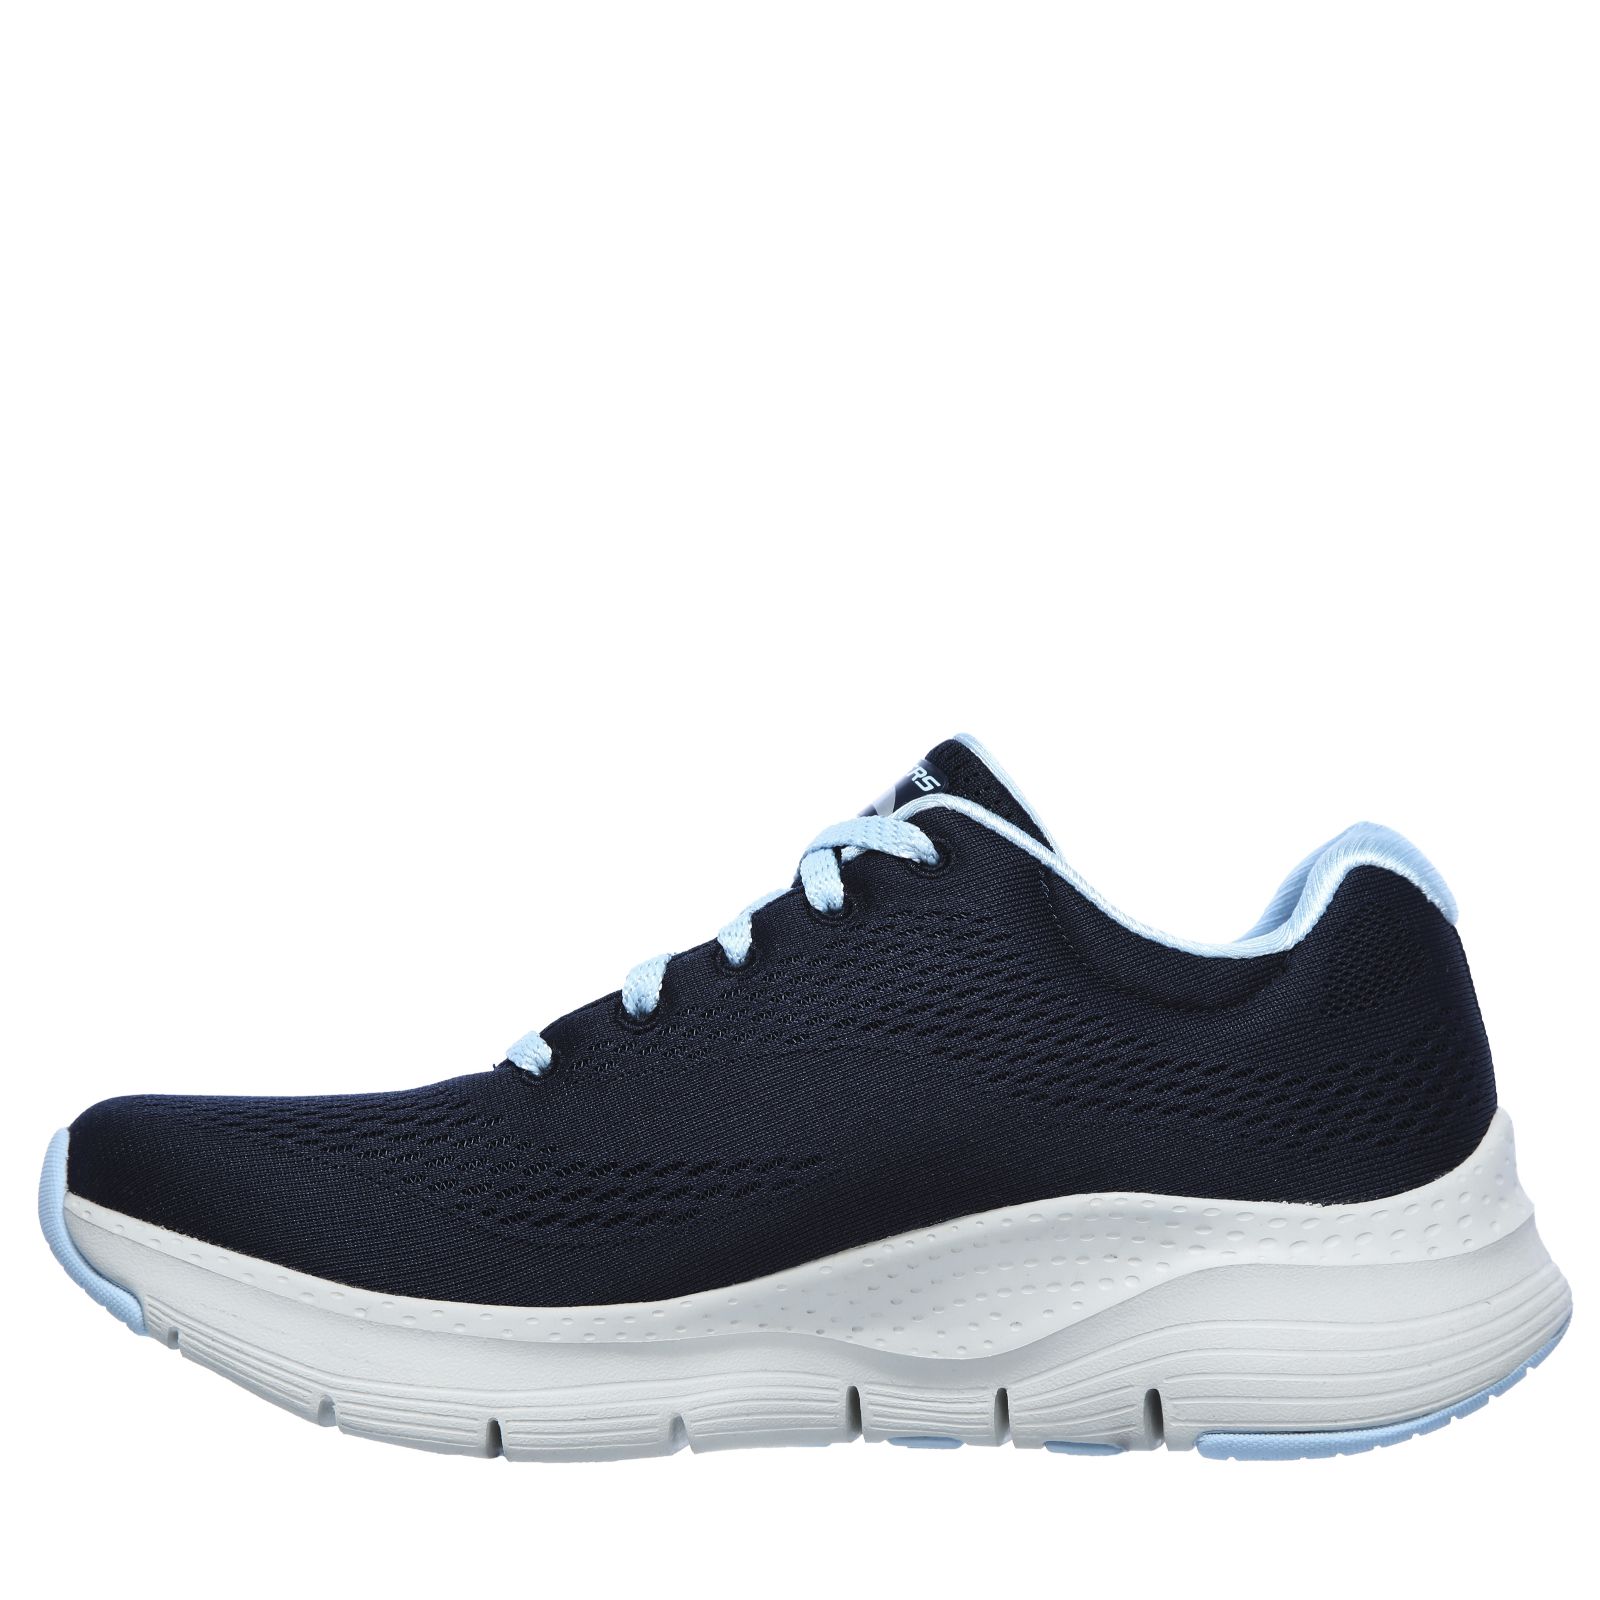 do skechers run small or large